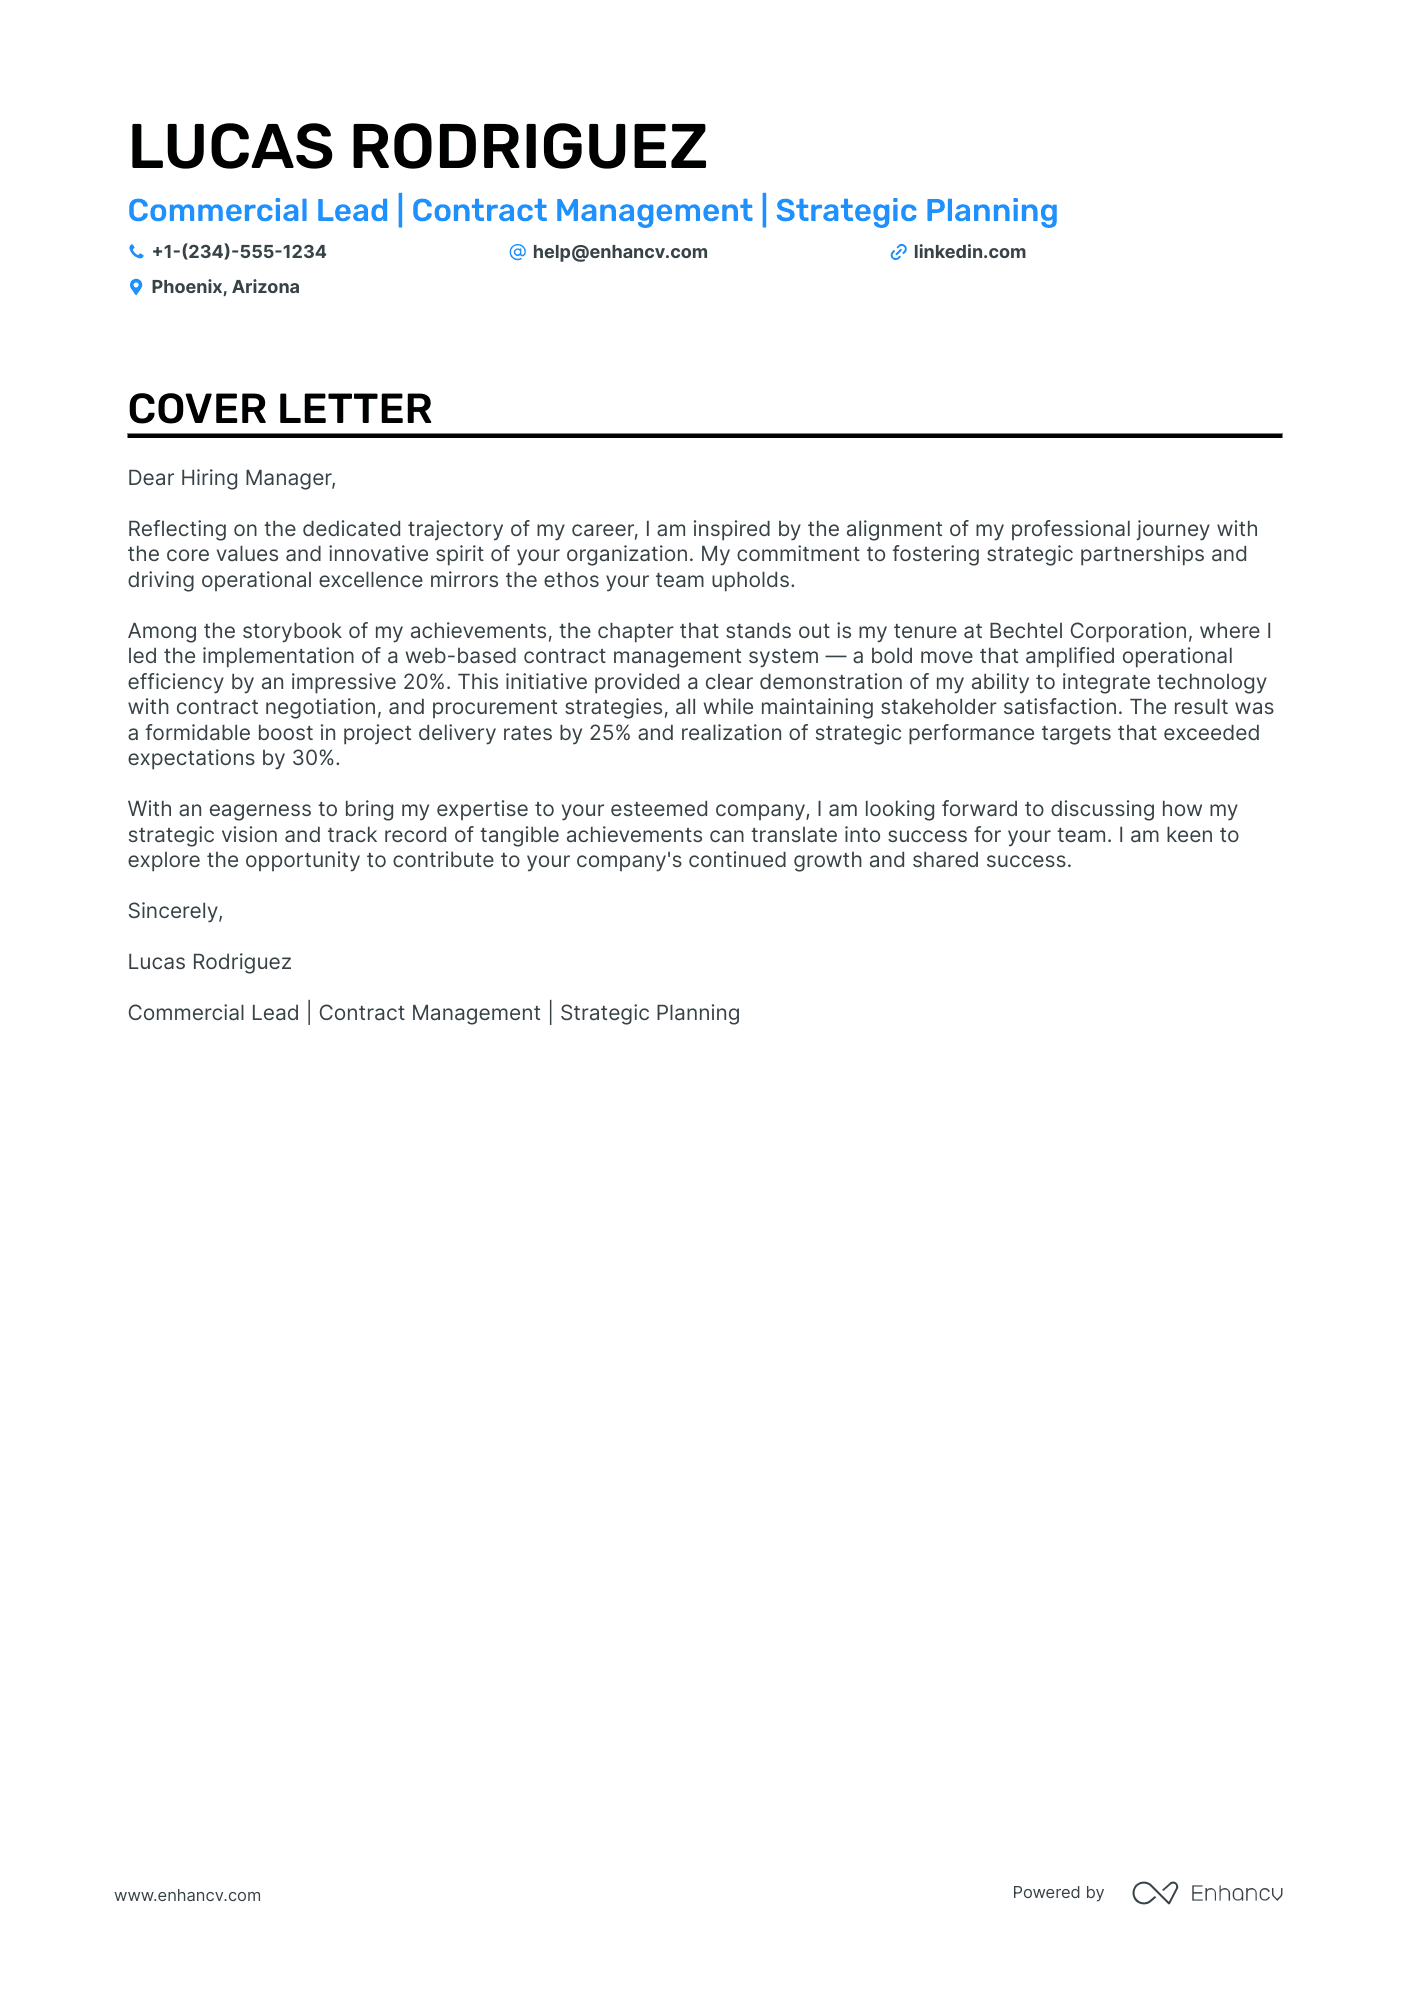 Commercial Manager cover letter